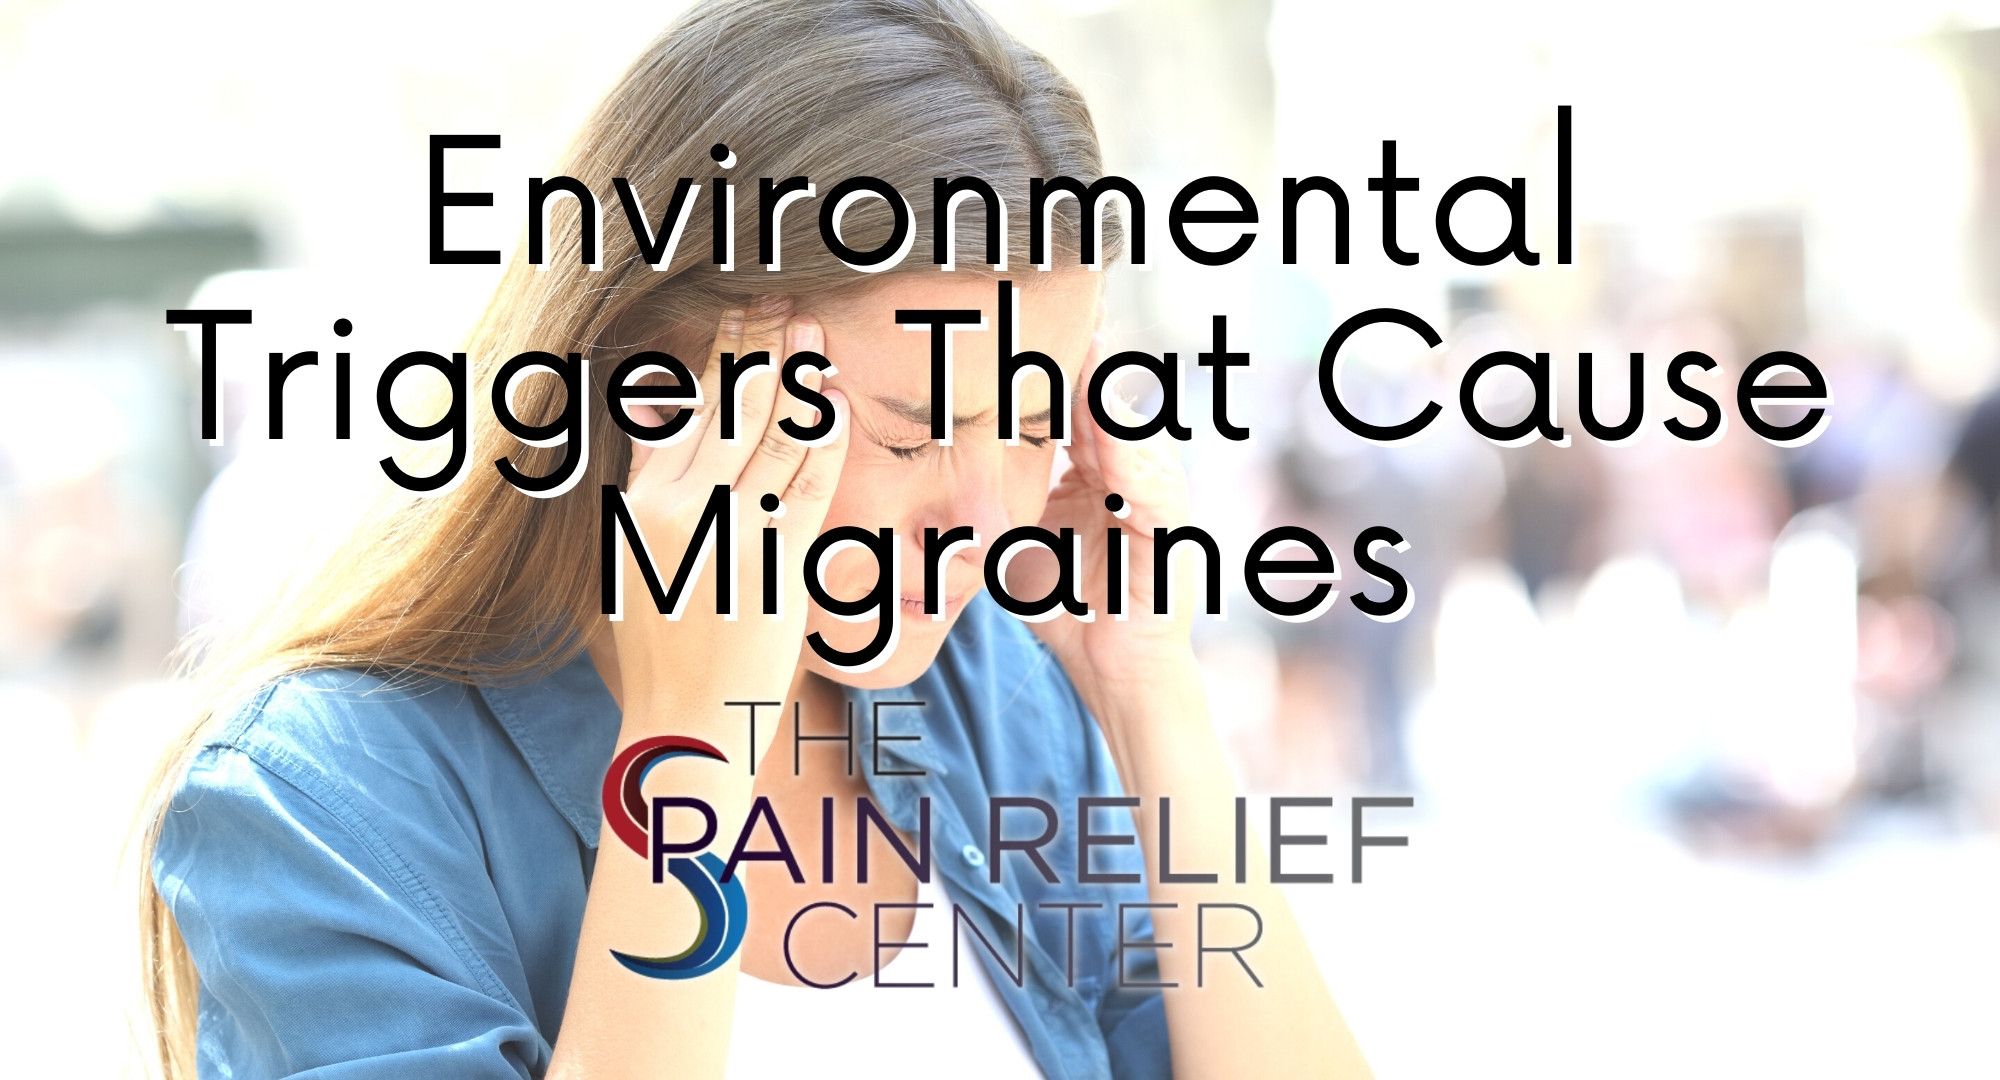 Environmental Triggers That Cause Migraines